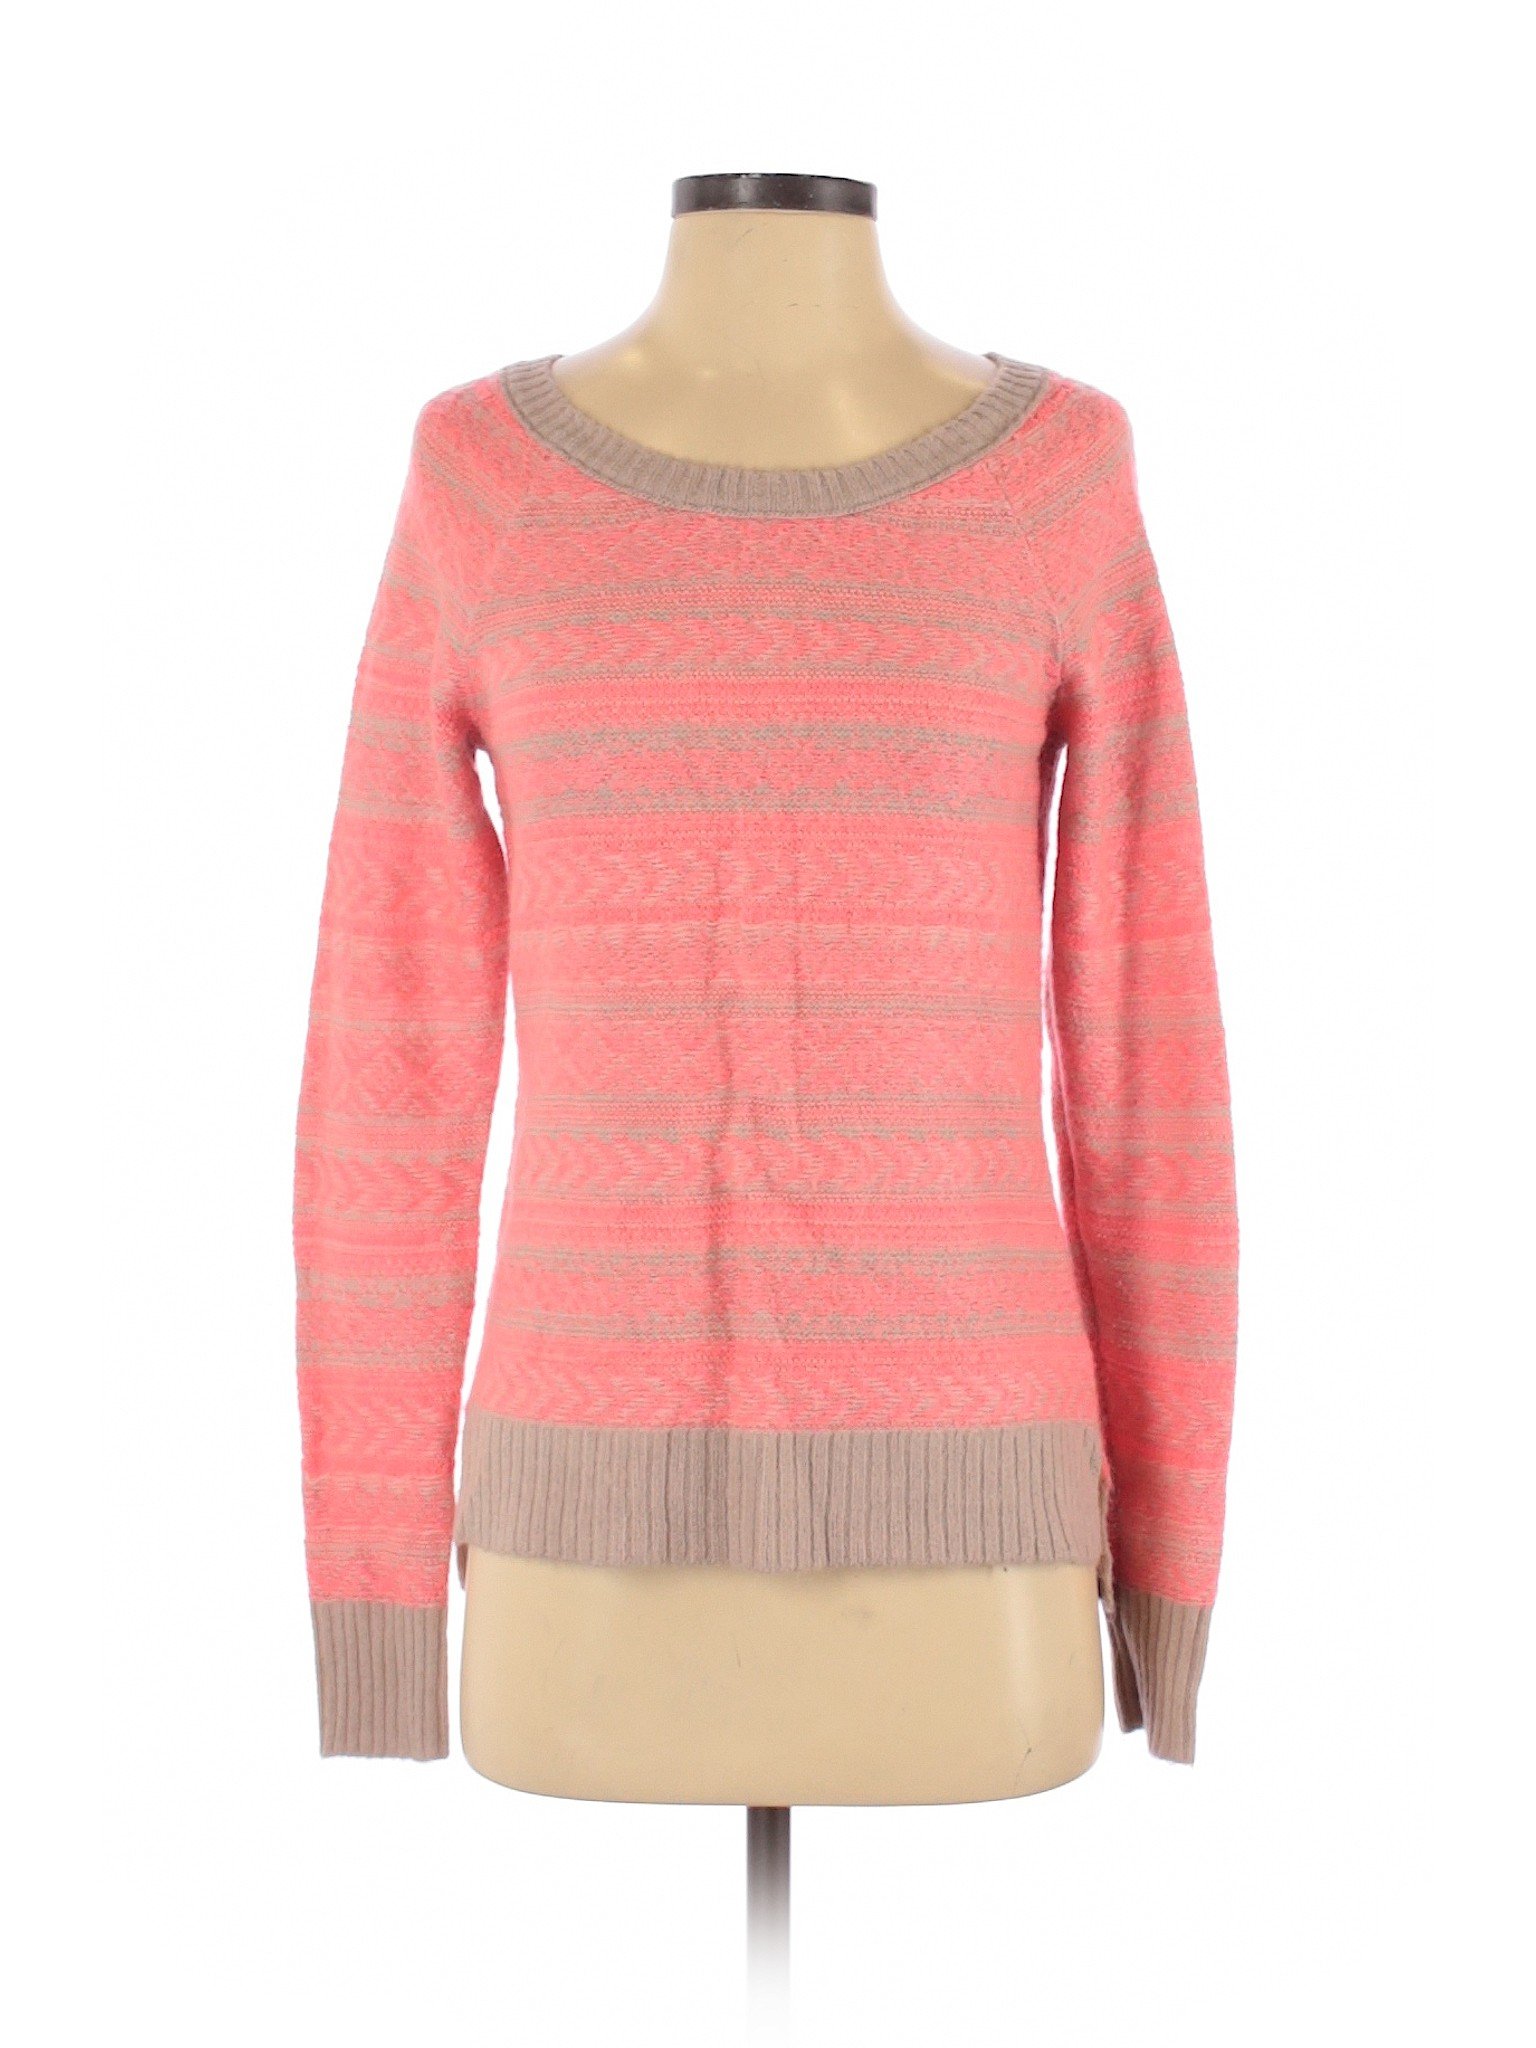 American Eagle Outfitters Women Pink Pullover Sweater S | eBay